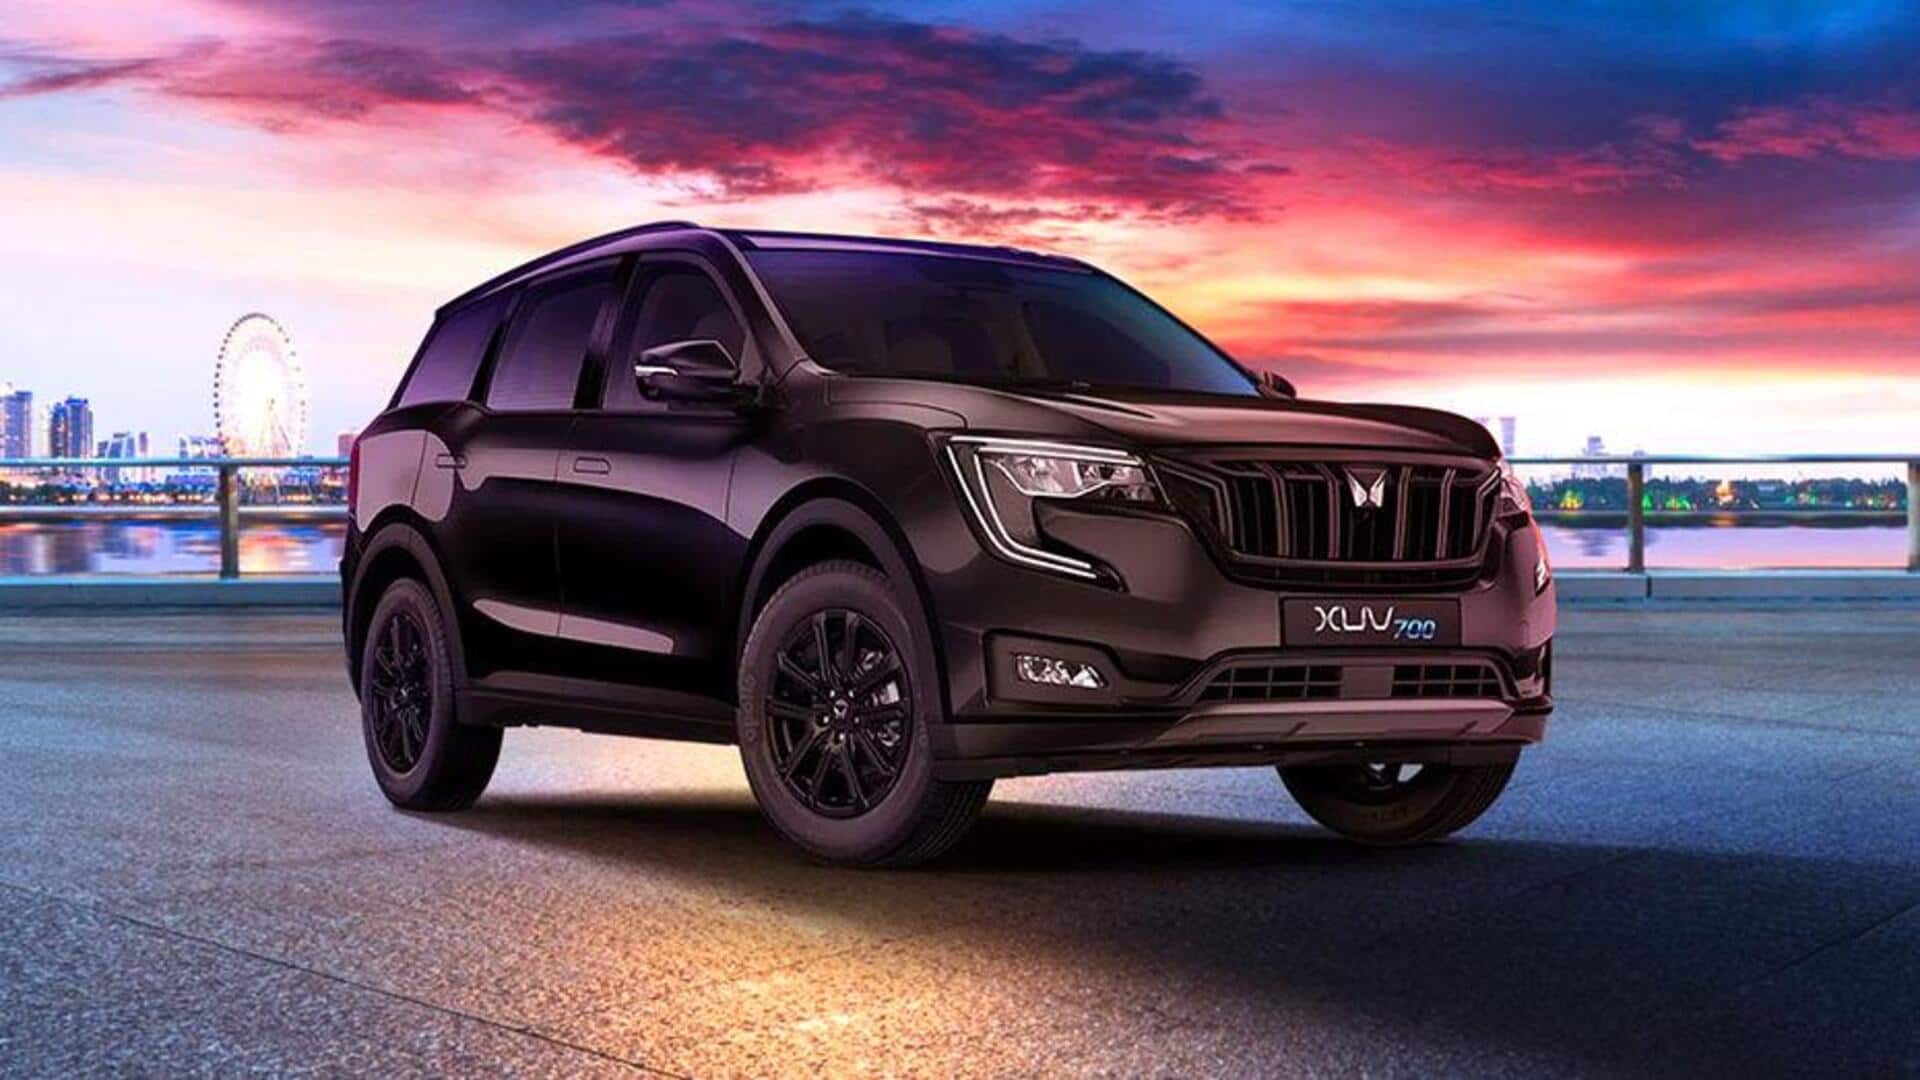 Mahindra XUV700's delivery time reduced to under 2 months